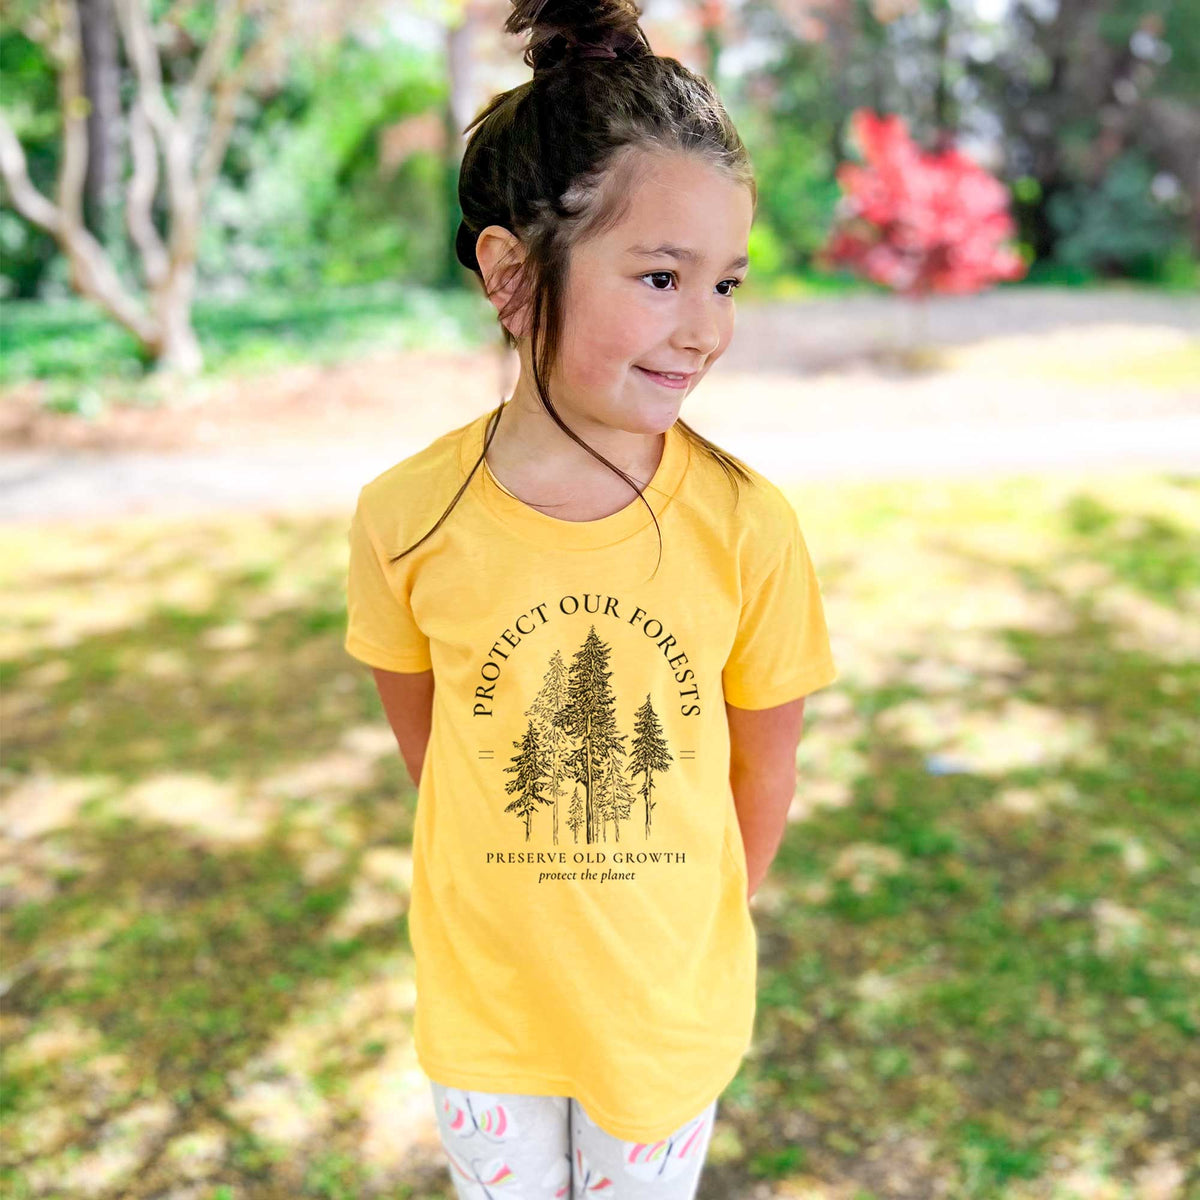 Protect our Forests - Preserve Old Growth - Kids Shirt